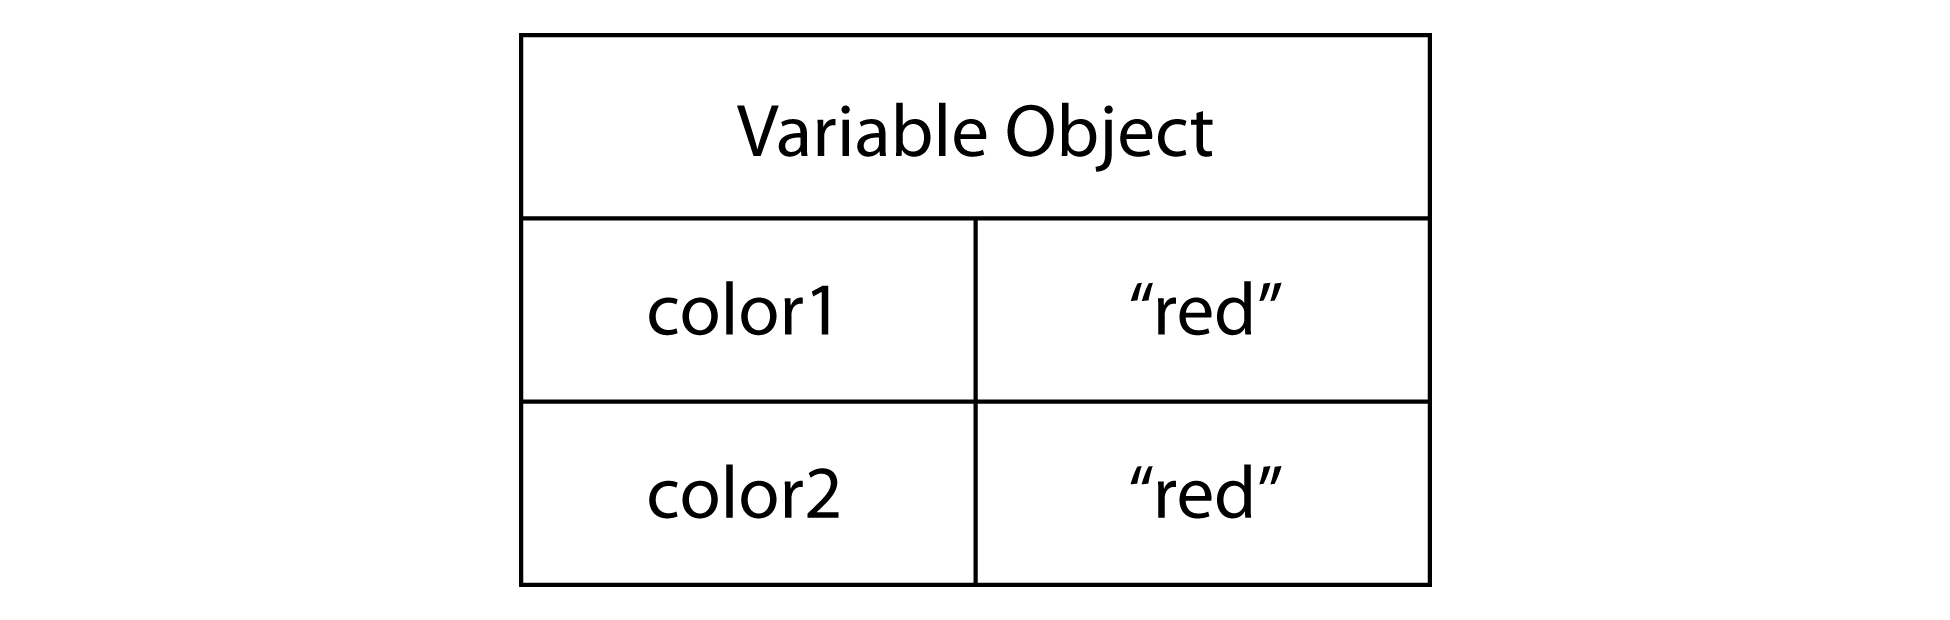 Figure 1-1: Variable Object